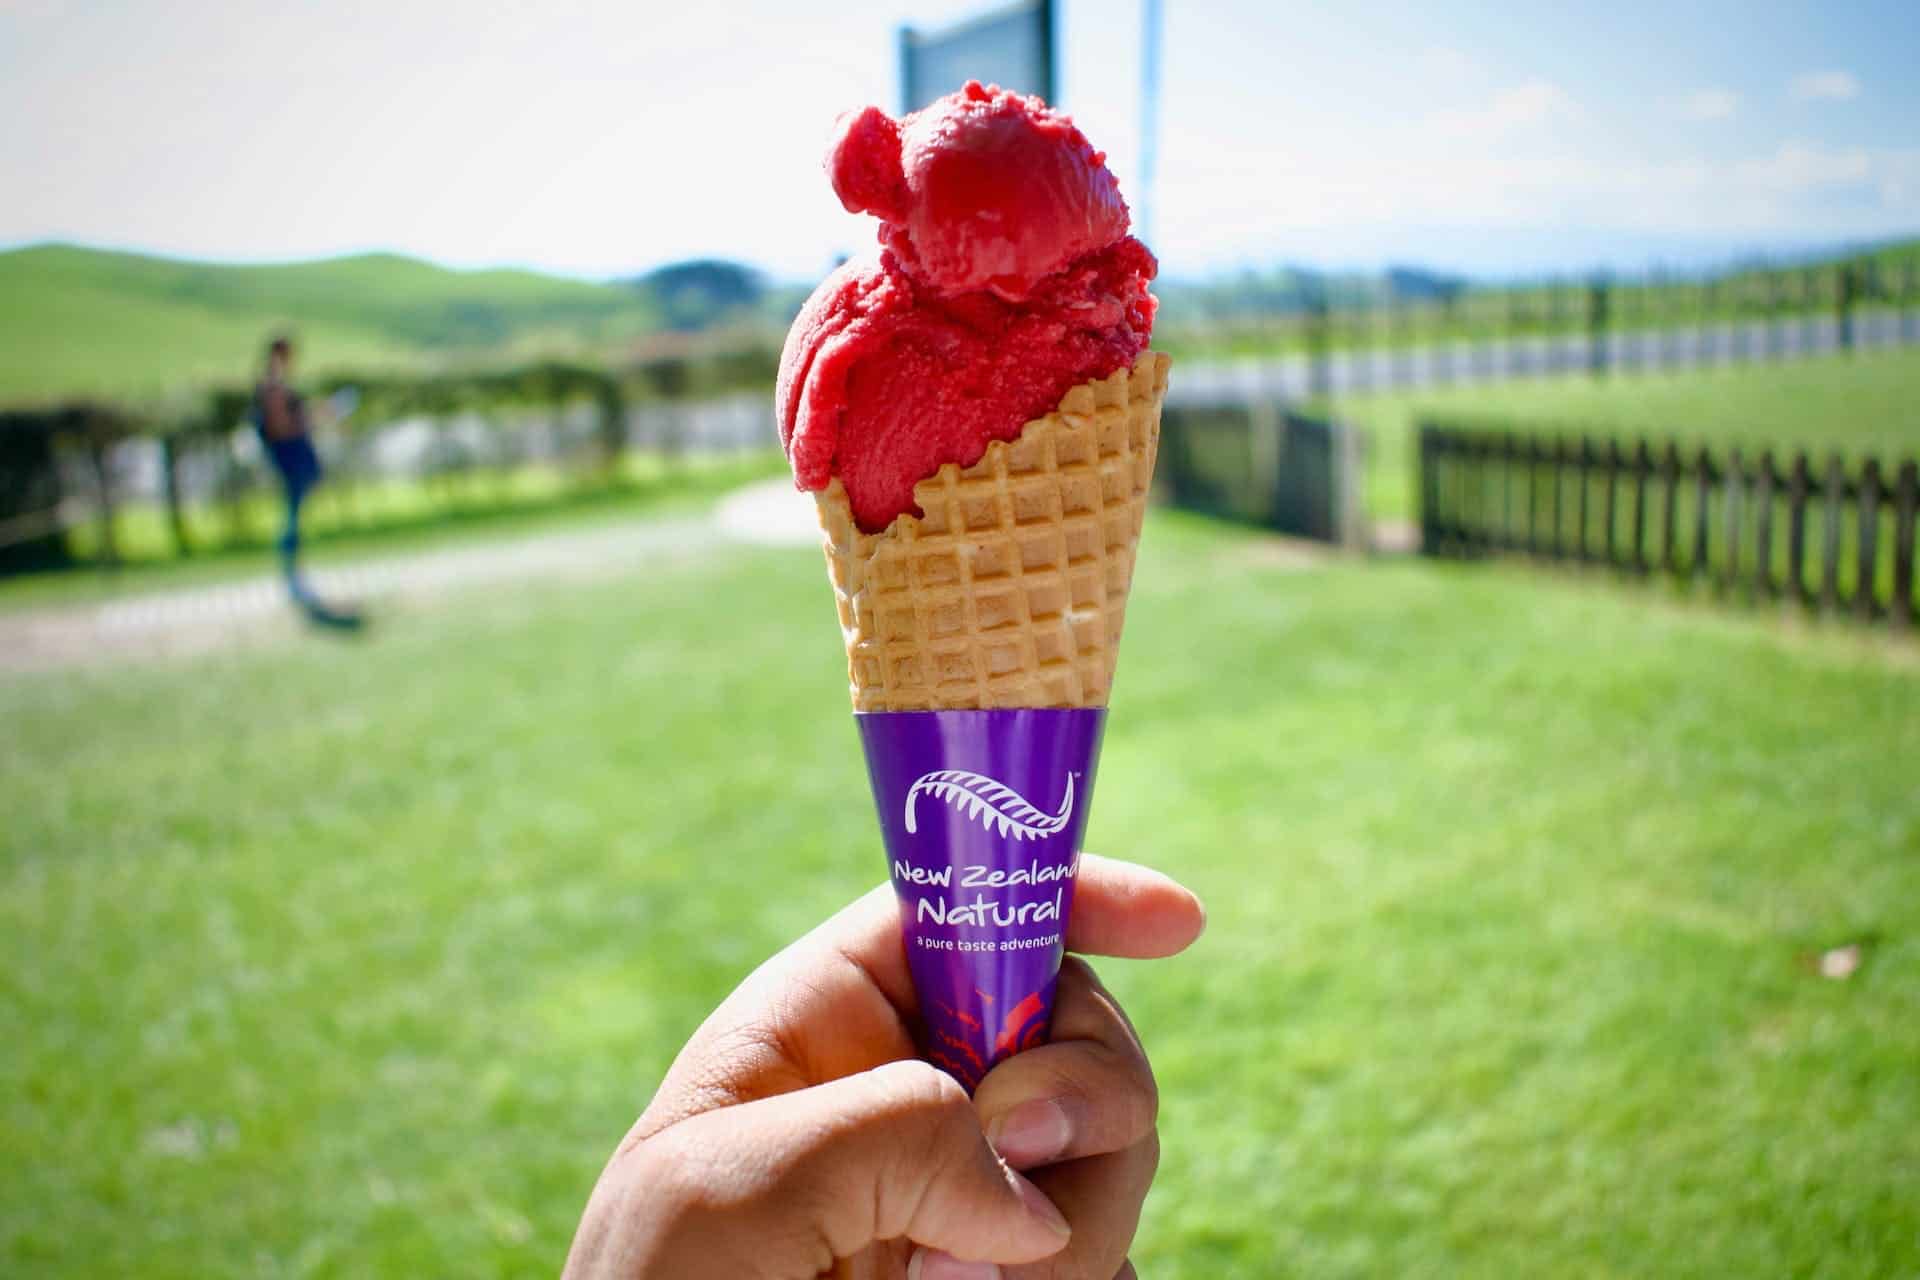 Someone holding up an ice cream cone on a farm in New Zealand with a label on the ice cream that says 